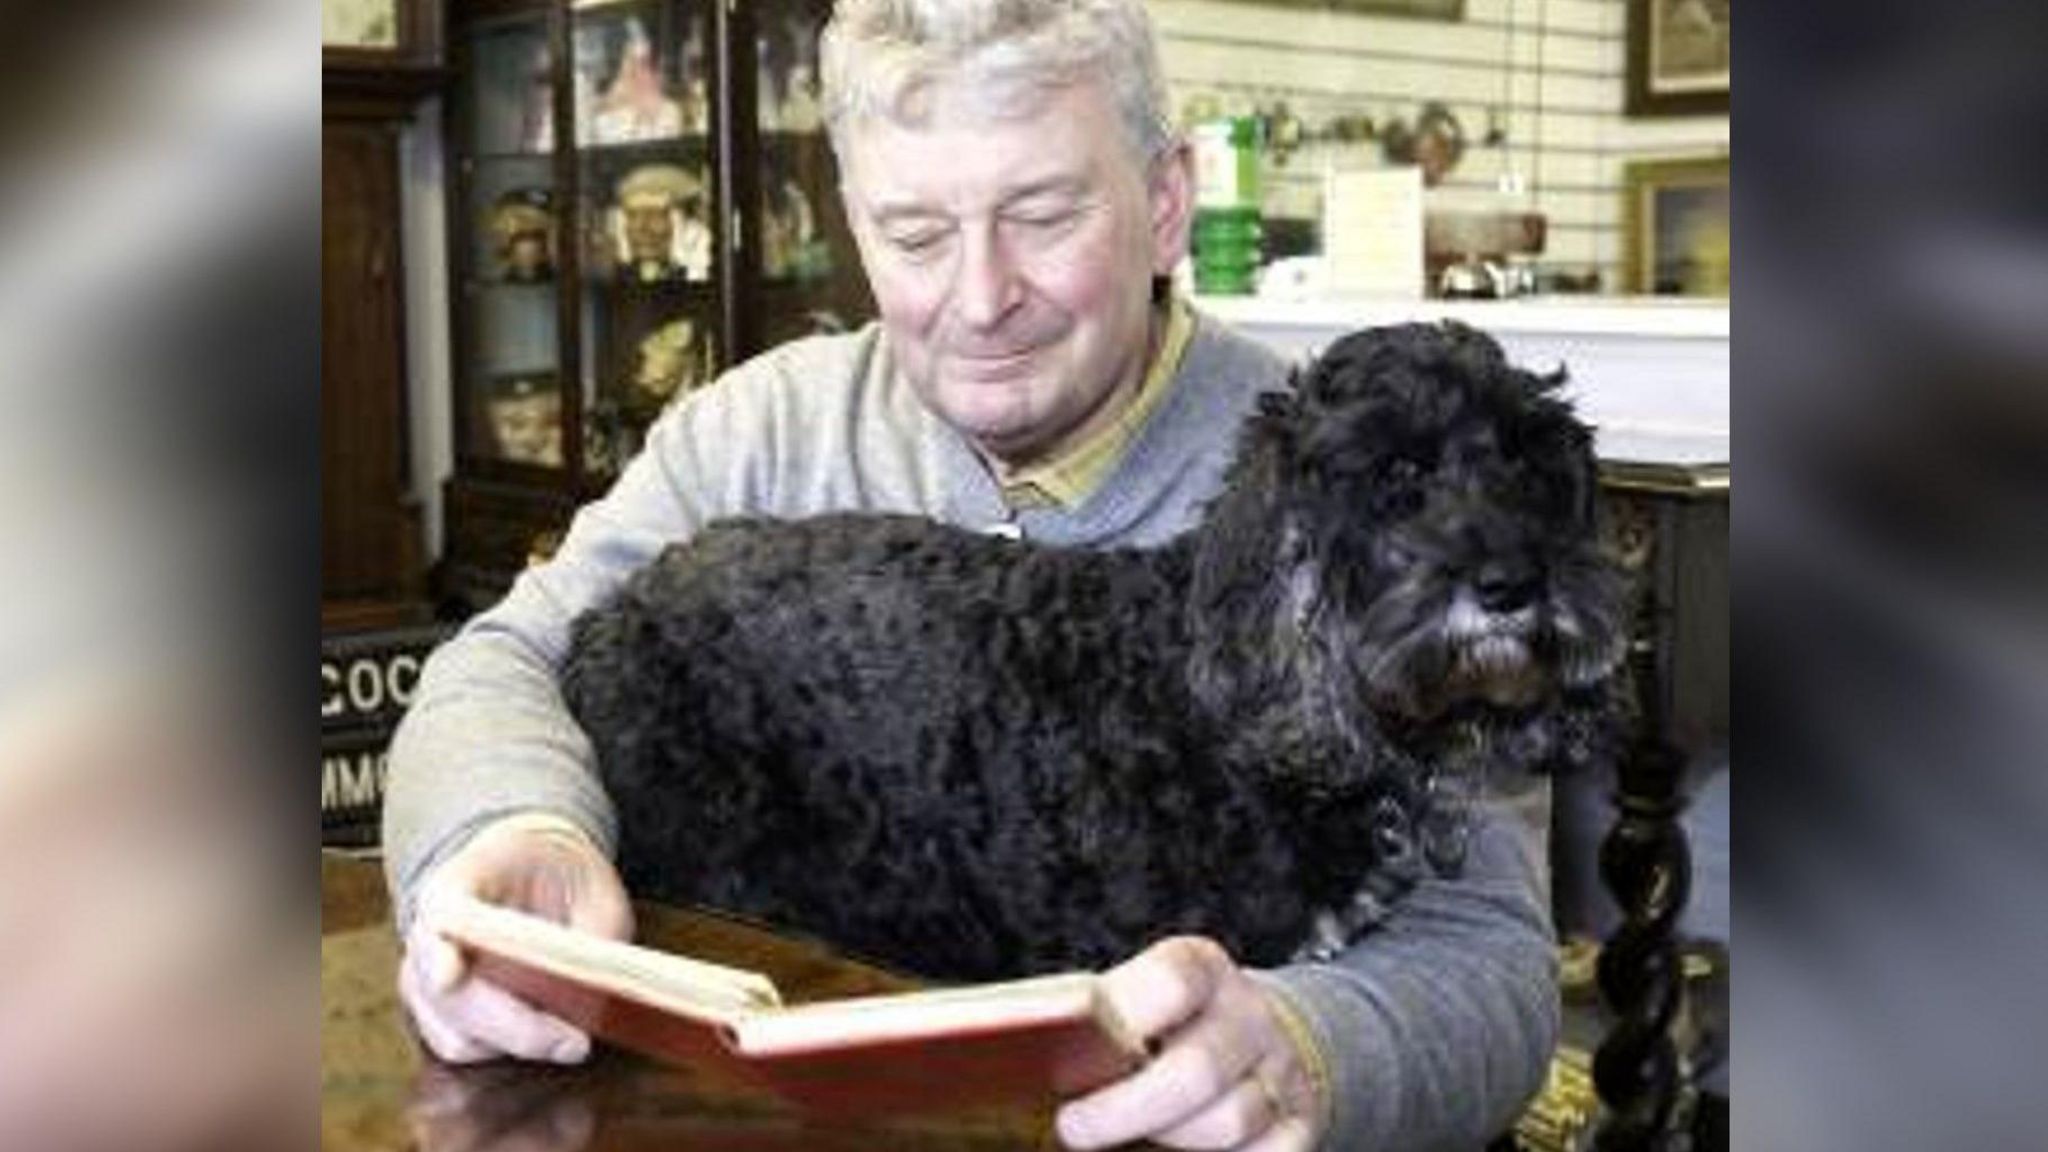 Paul Potter with his dog Henry looking at the autograph book